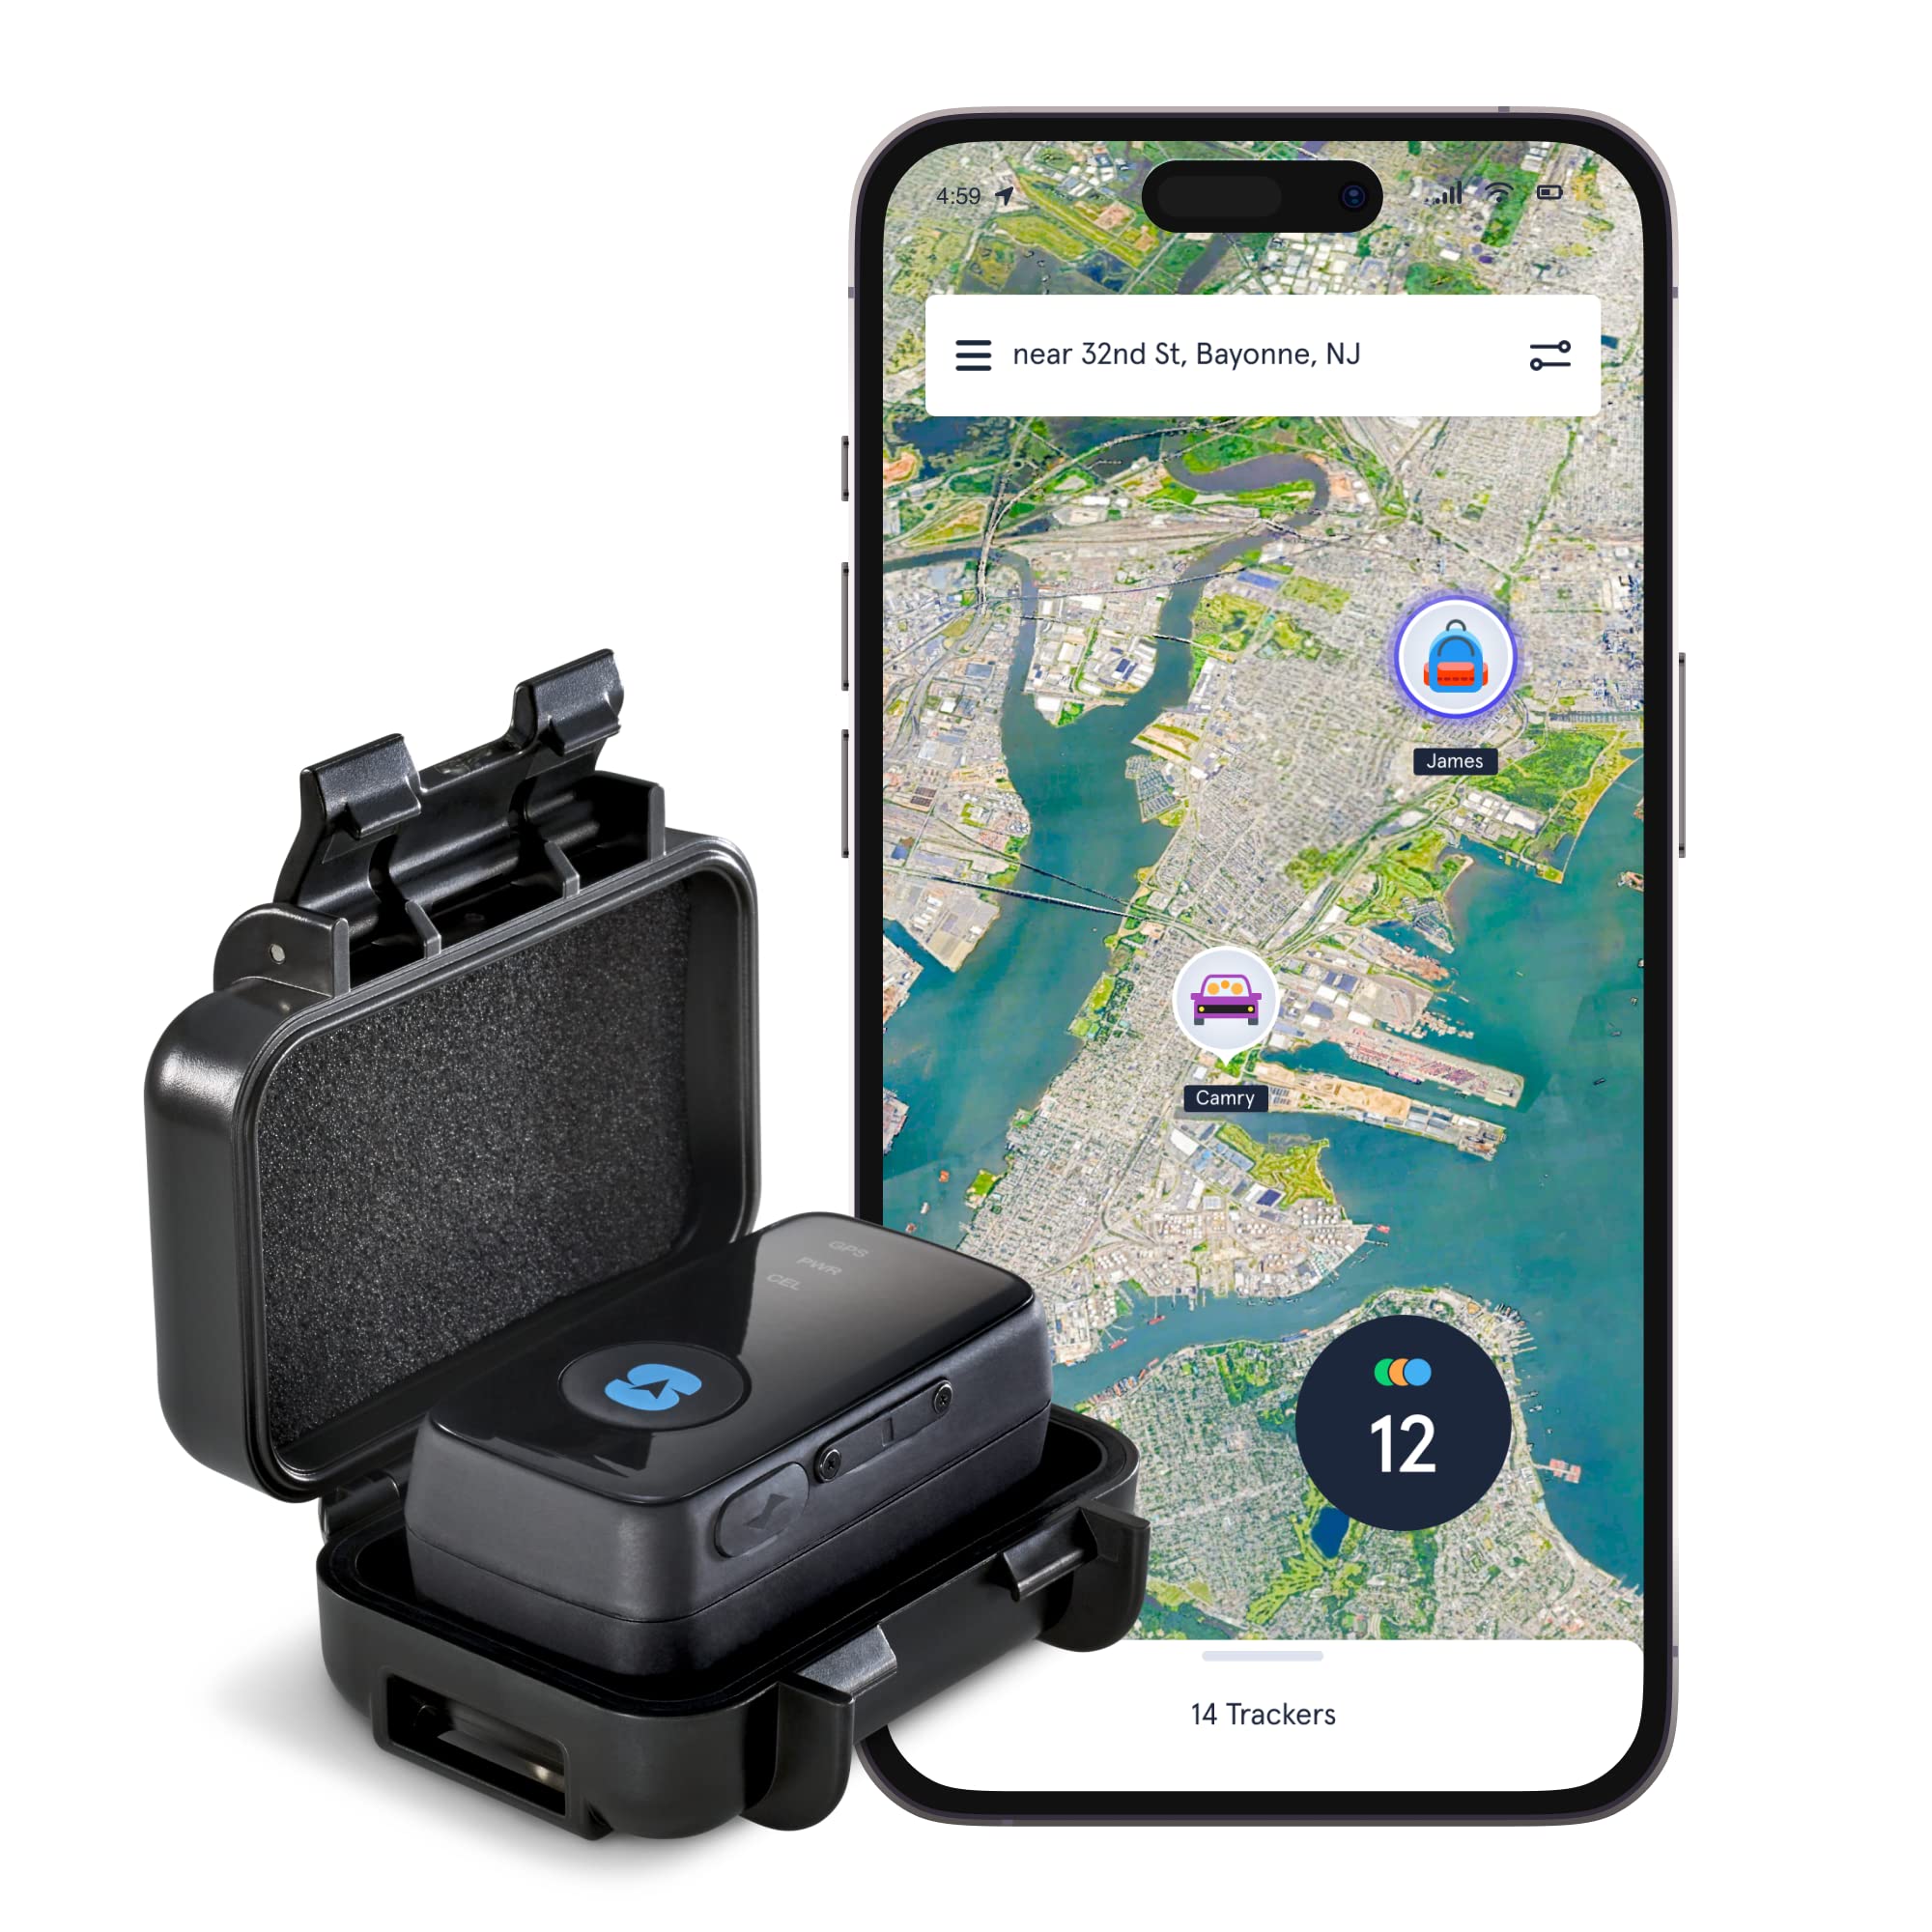 Spytec GPS GL300 GPS Tracker, Weather Proof Magnetic Case, for Vehicles, Cars, Trucks, Loved Ones, Businesses | Asset Tracker, Unlimited US and Worldwide Real-Time Tracking App - Subscription Required